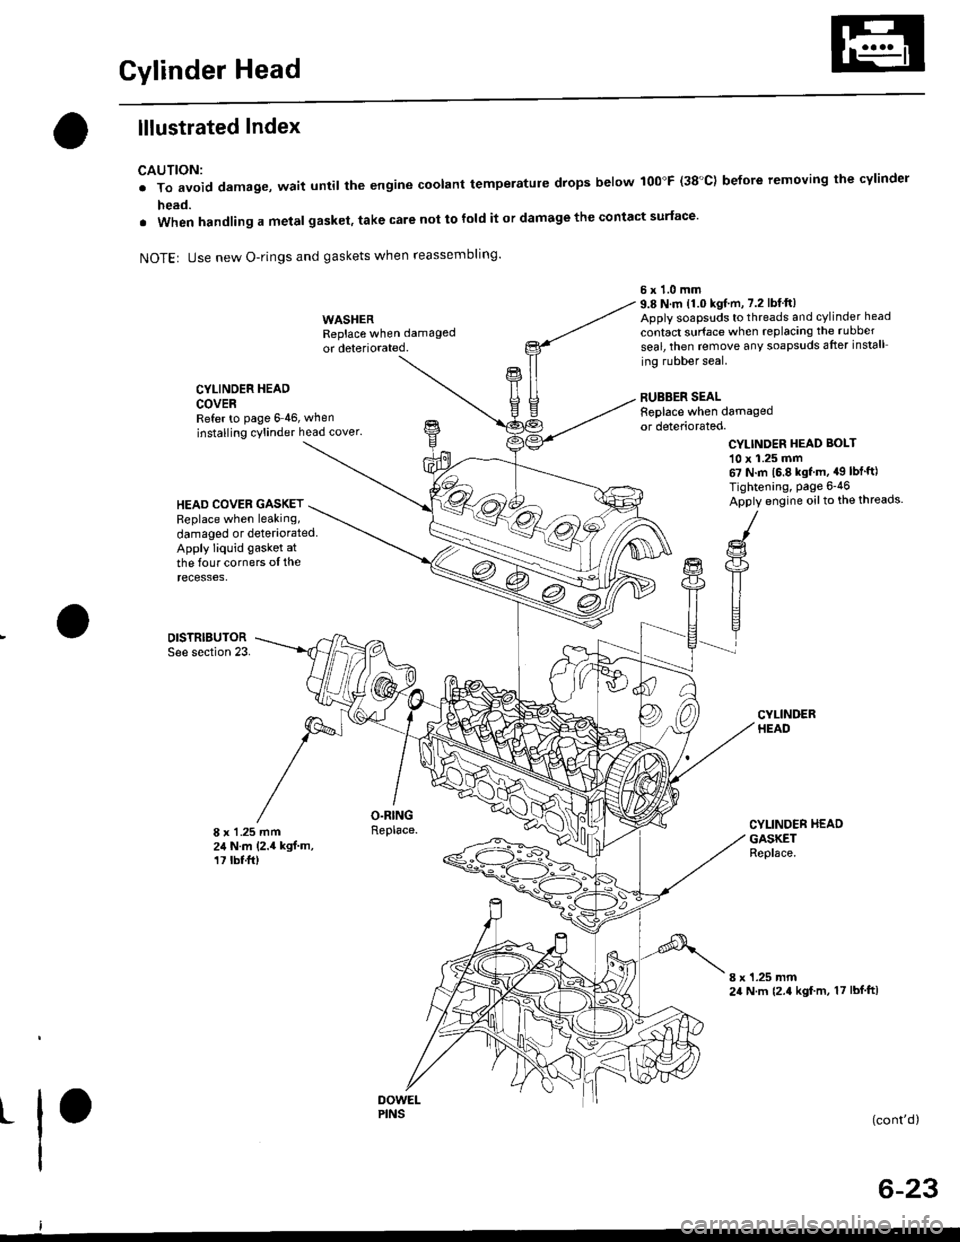 HONDA CIVIC 1997 6.G Workshop Manual Gylinder Head
lllustrated Index
CAUTION:
. To avoid damage, wait until the engine coolant temperatule drops below 100"F (38C) before removing the cylinder
head.
. When handling a metal gasket, take c